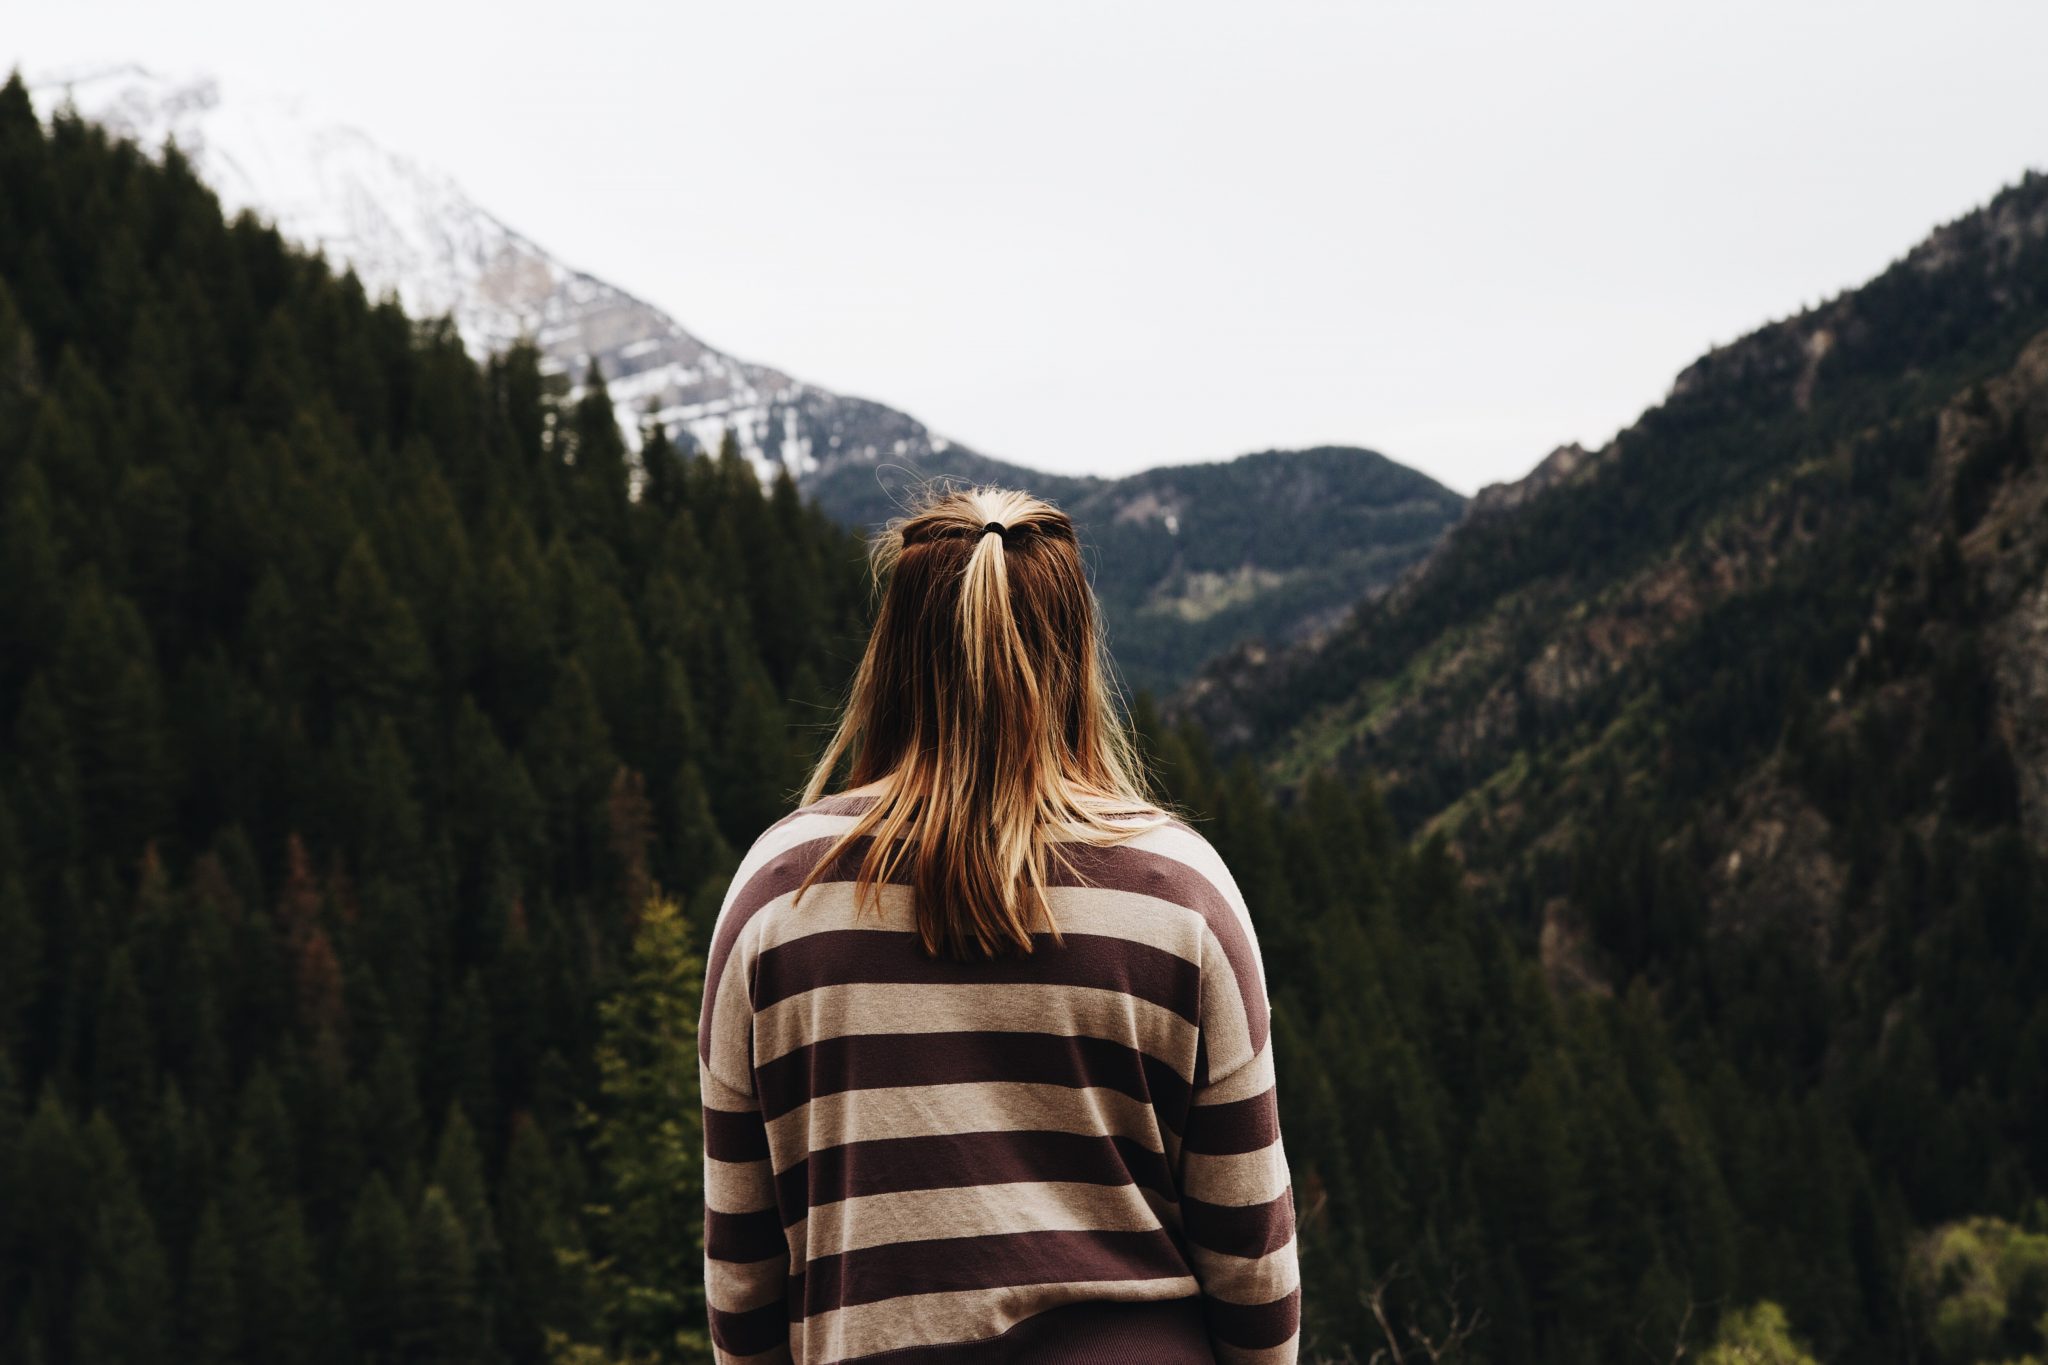 A blonde woman stands with her back facing the camera looking out towards a forested, mountain range.